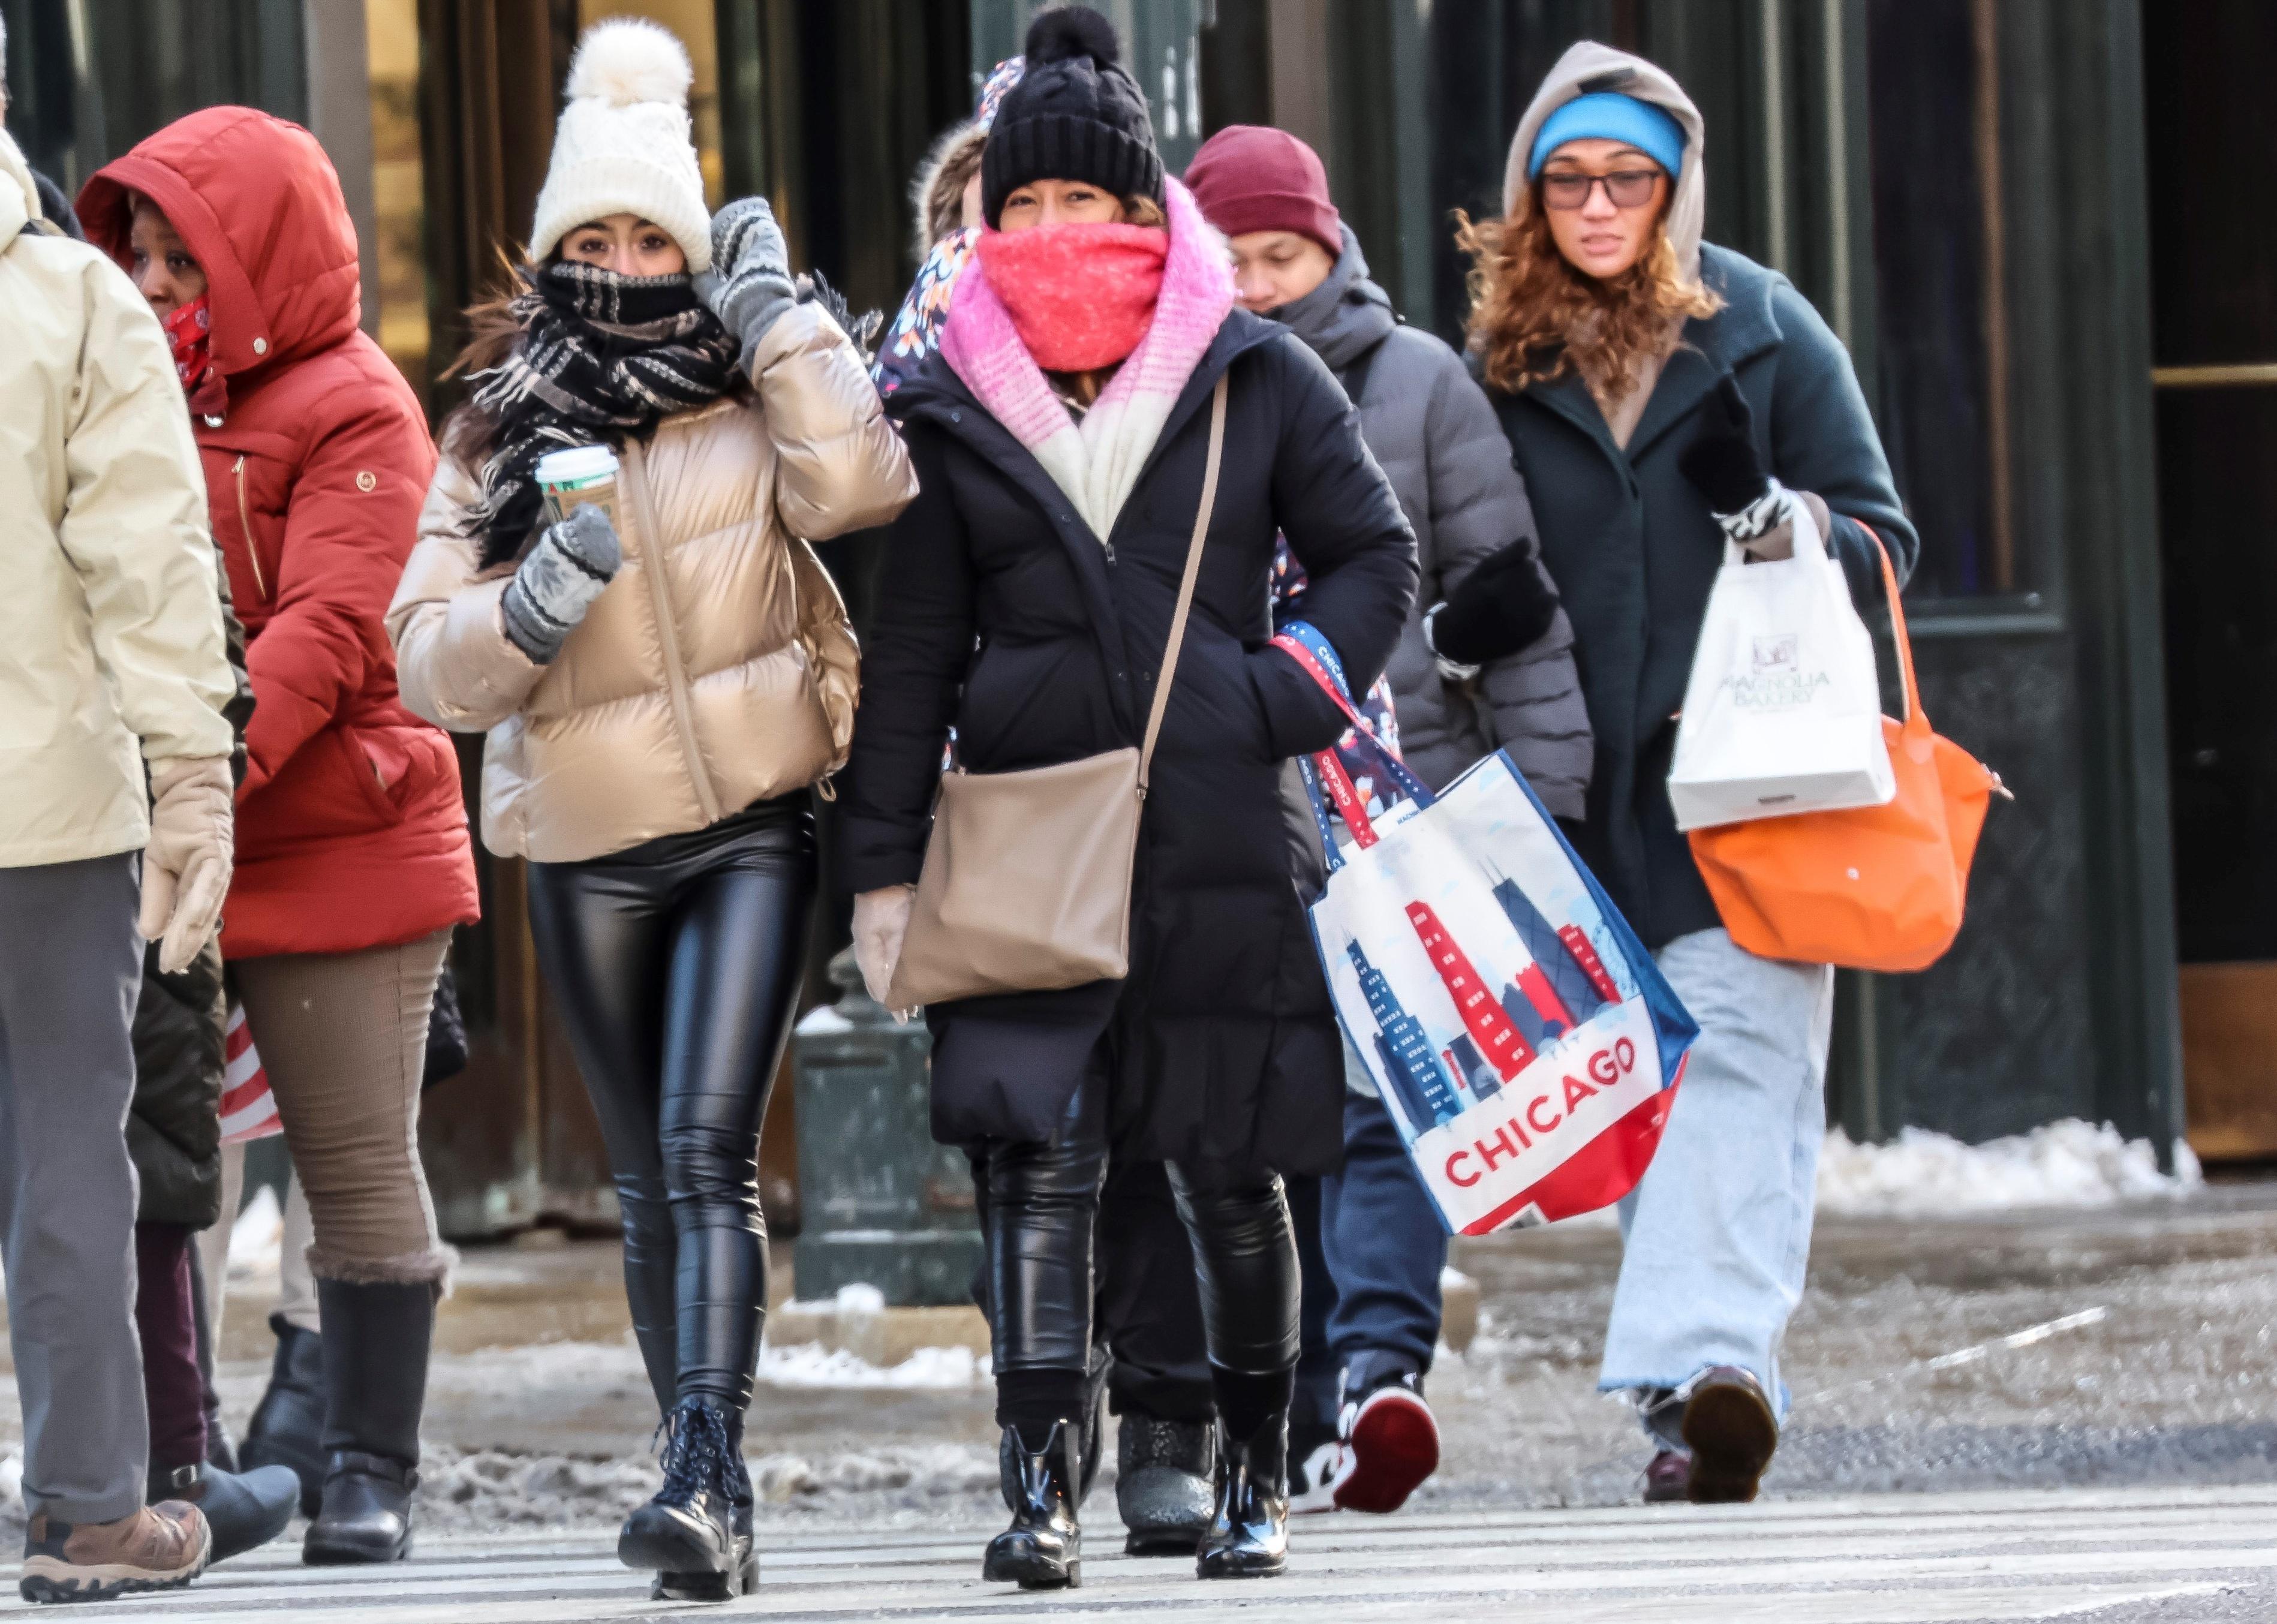 Bundled up shoppers walking downtown in Chicago.